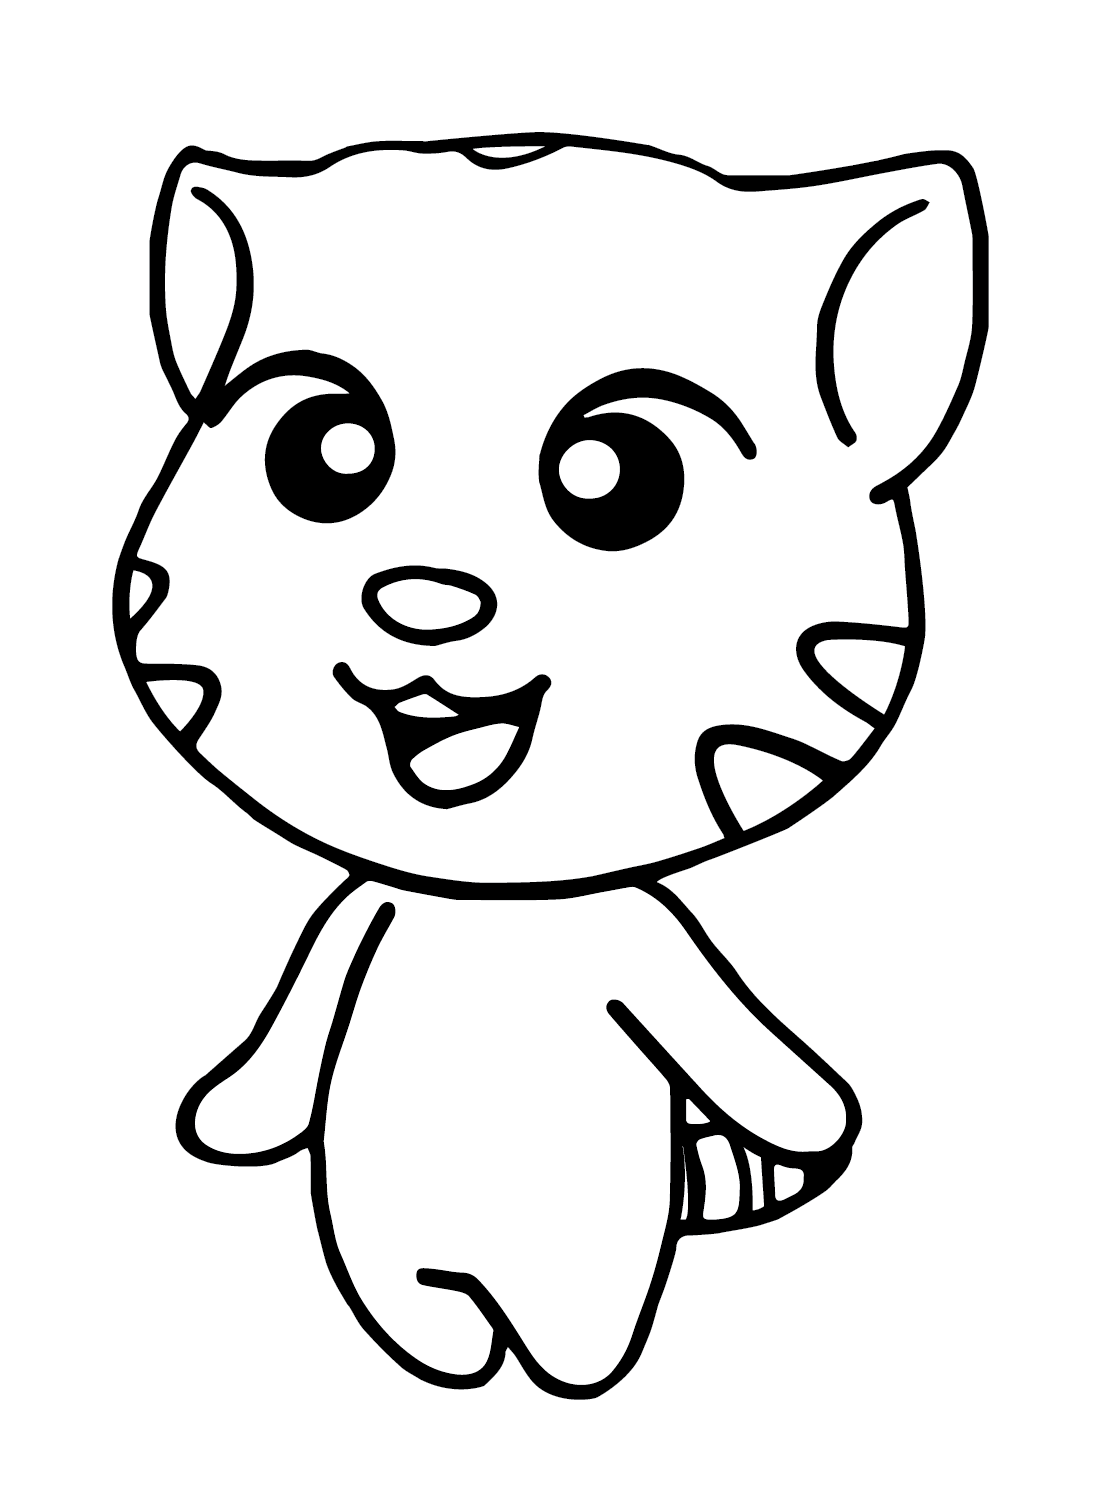 Talking Tom Coloring Pages Printable ...